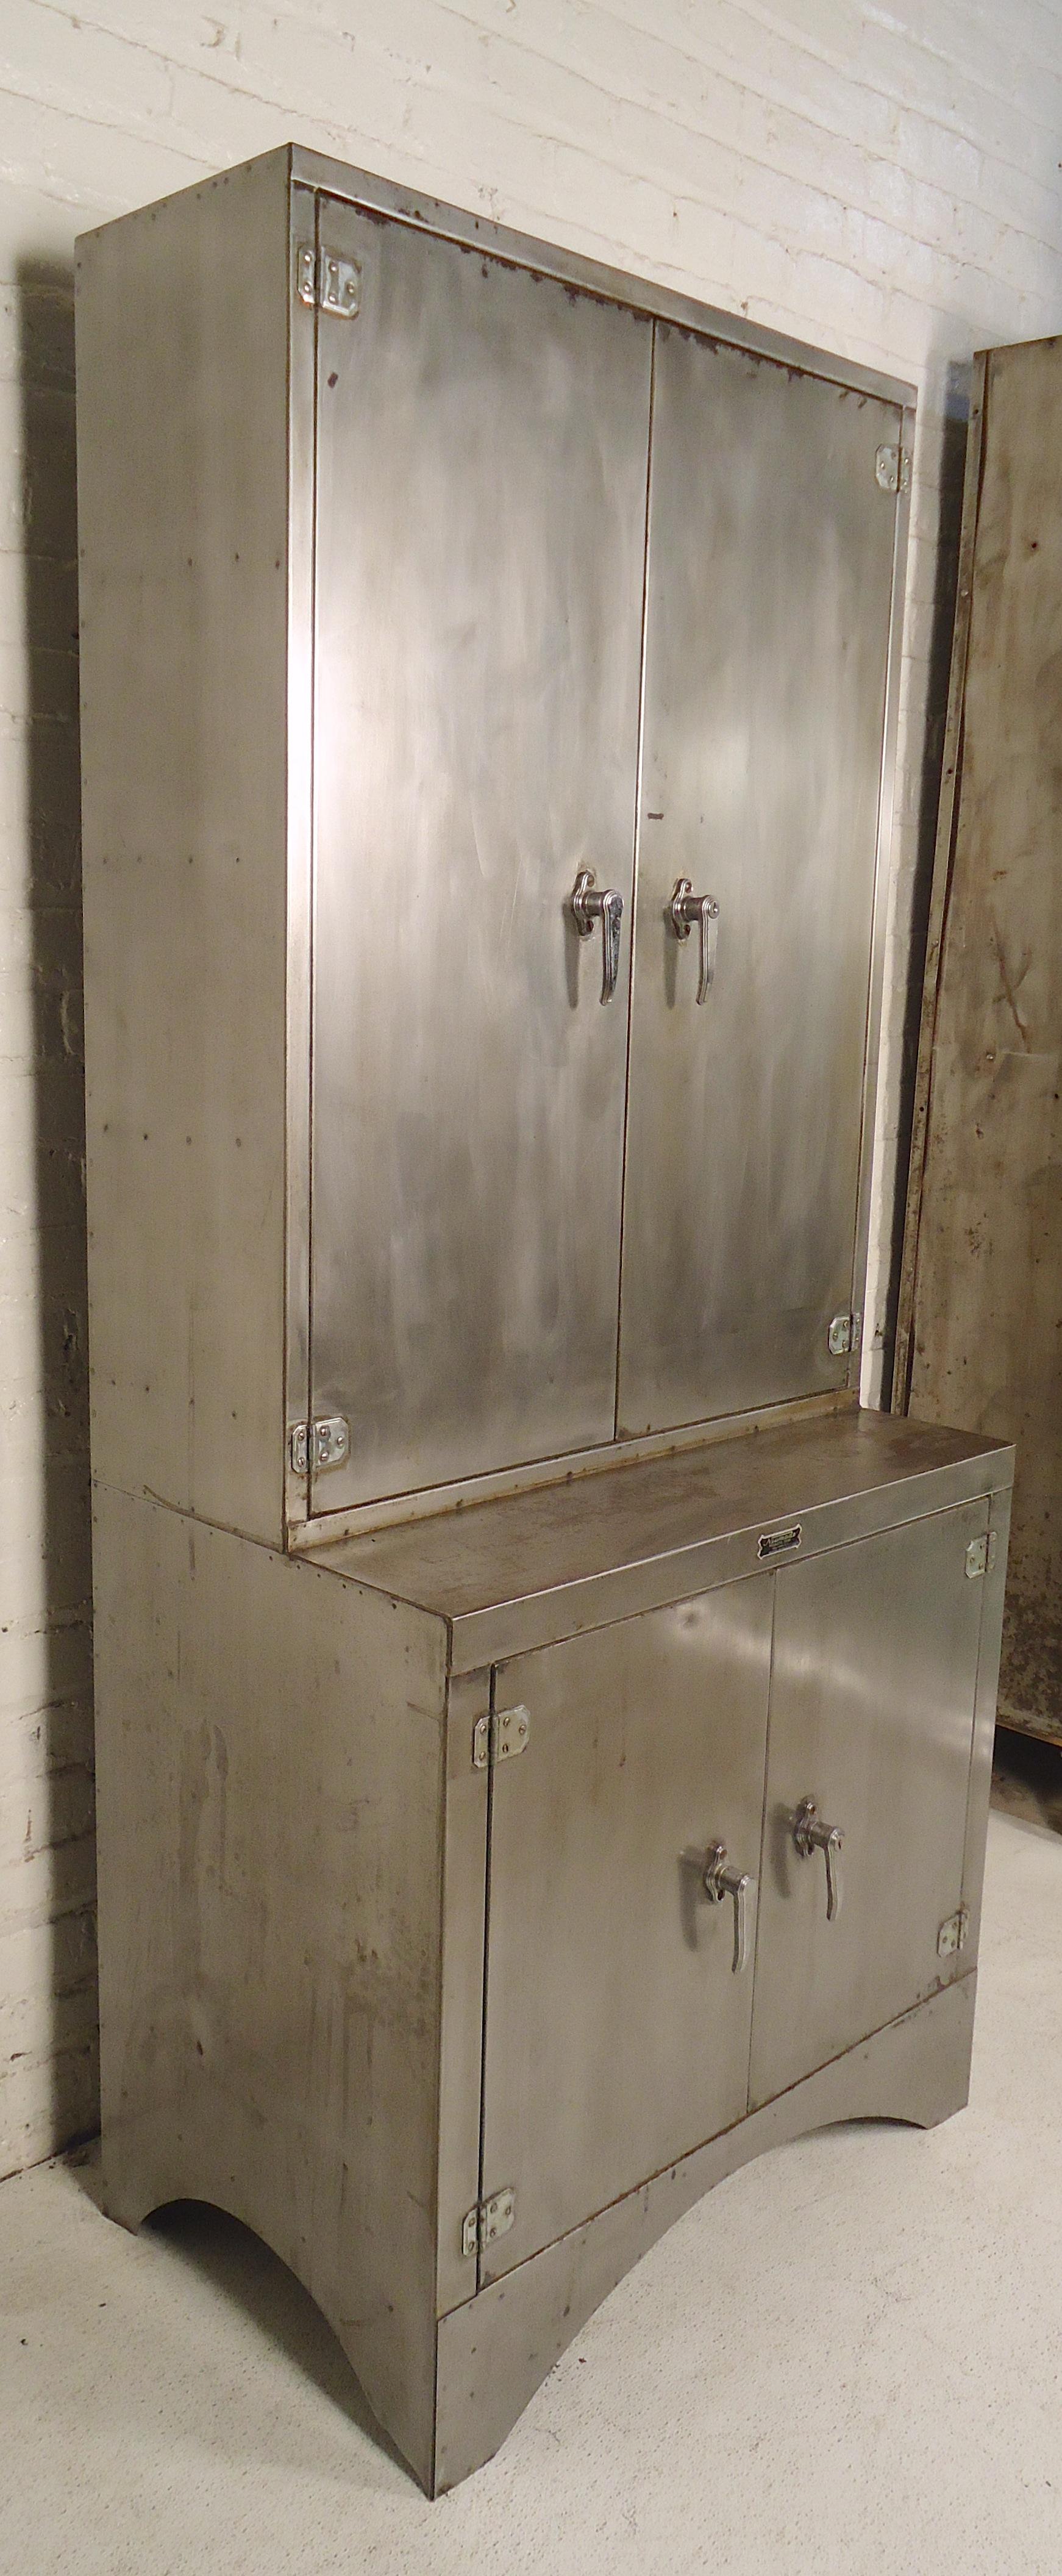 Tall cabinet restored in a bare metal style finish. Has two storage cabinets with file dividers that can be removed.

(Please confirm item location - NY or NJ - with dealer).
 